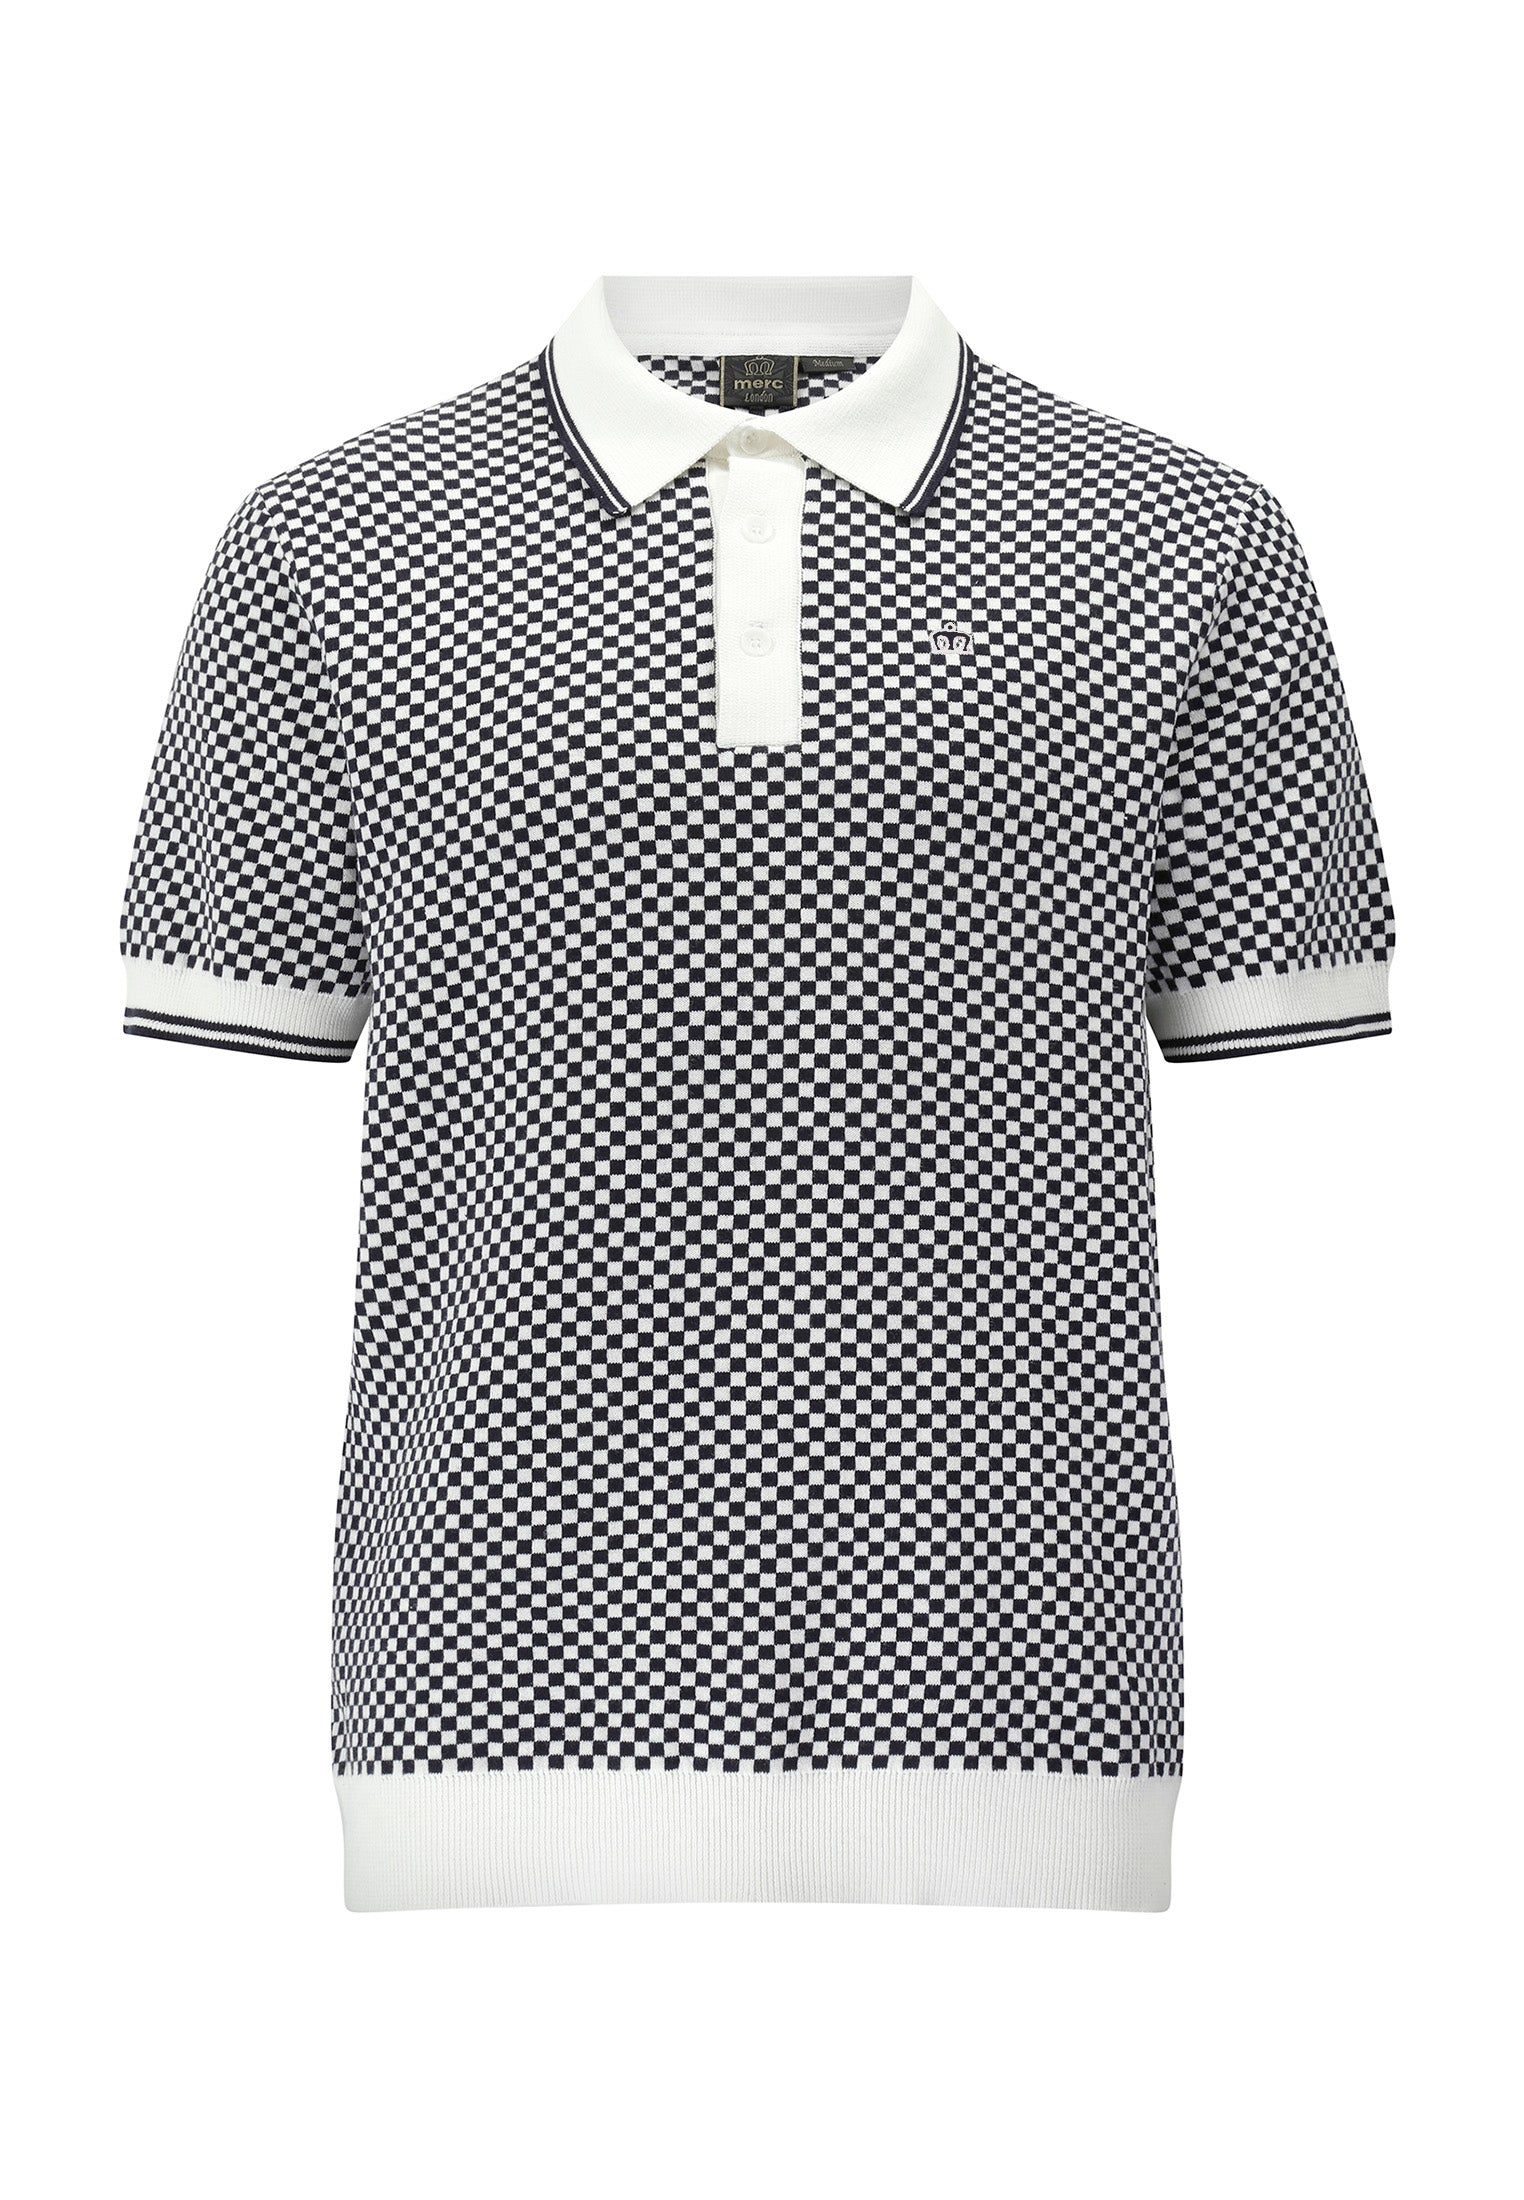 Check Knitted Polo Shirt by Merc